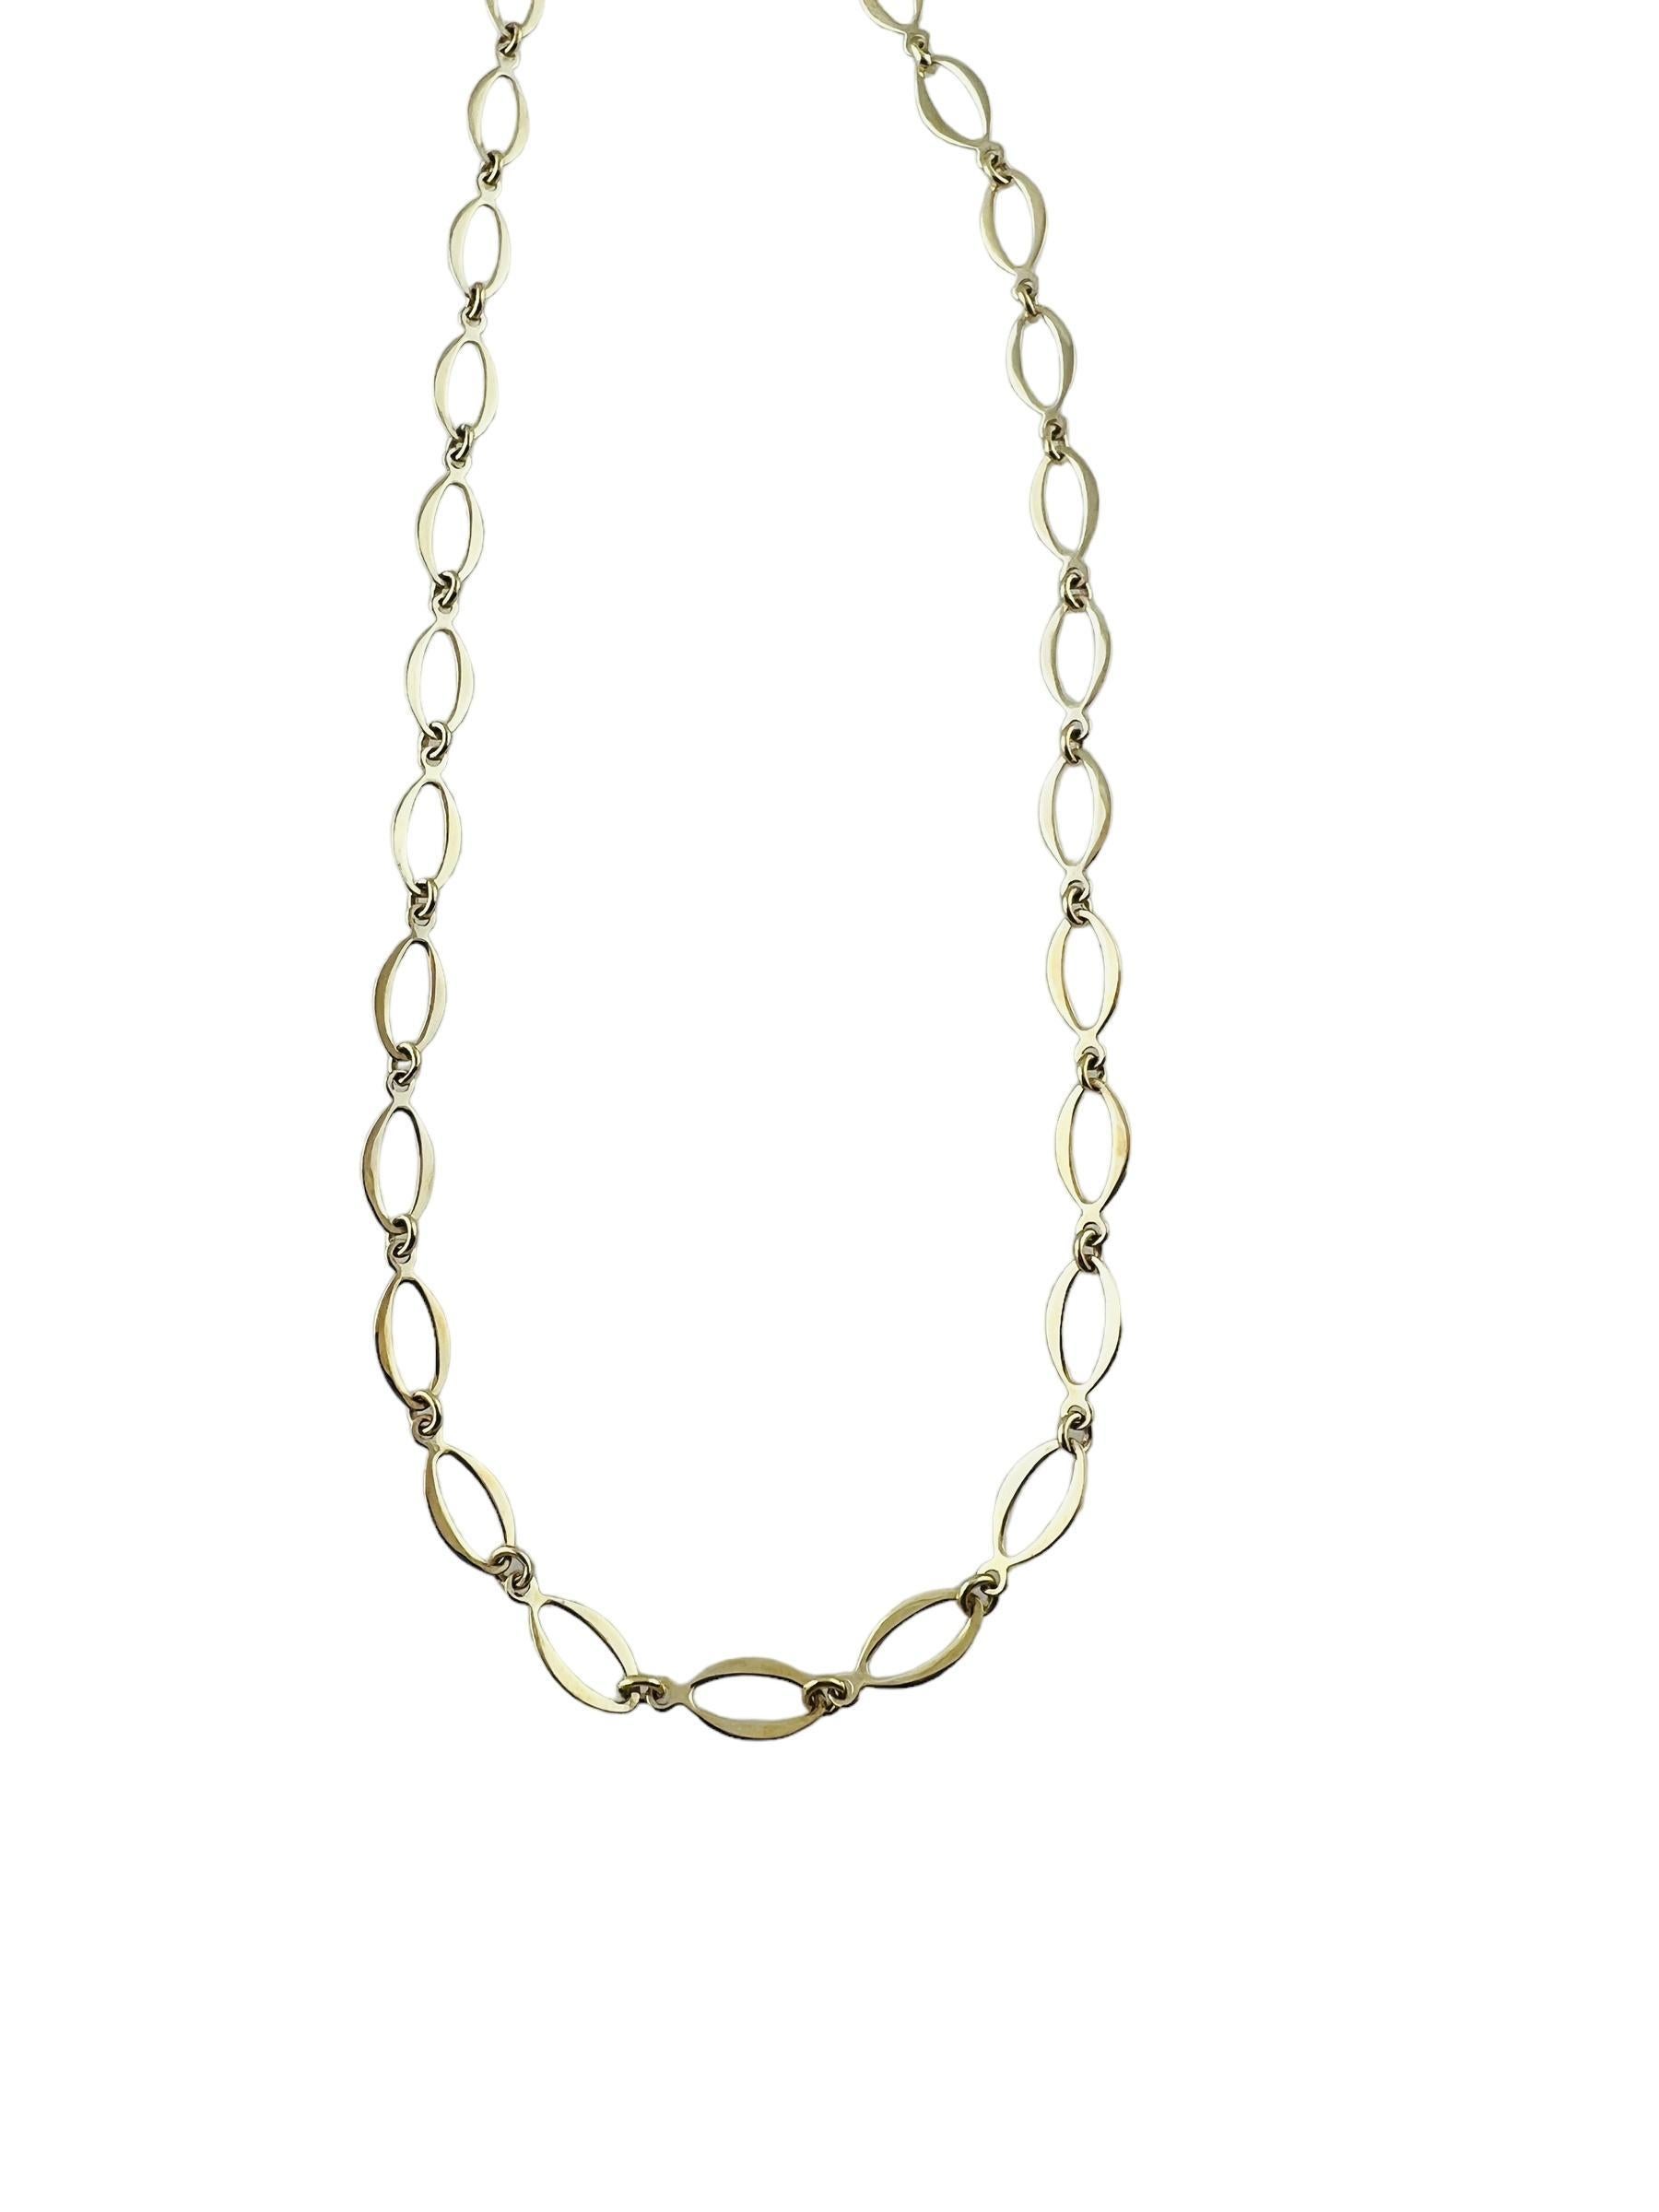 14K Yellow Gold Oval Link Necklace 17" #17676